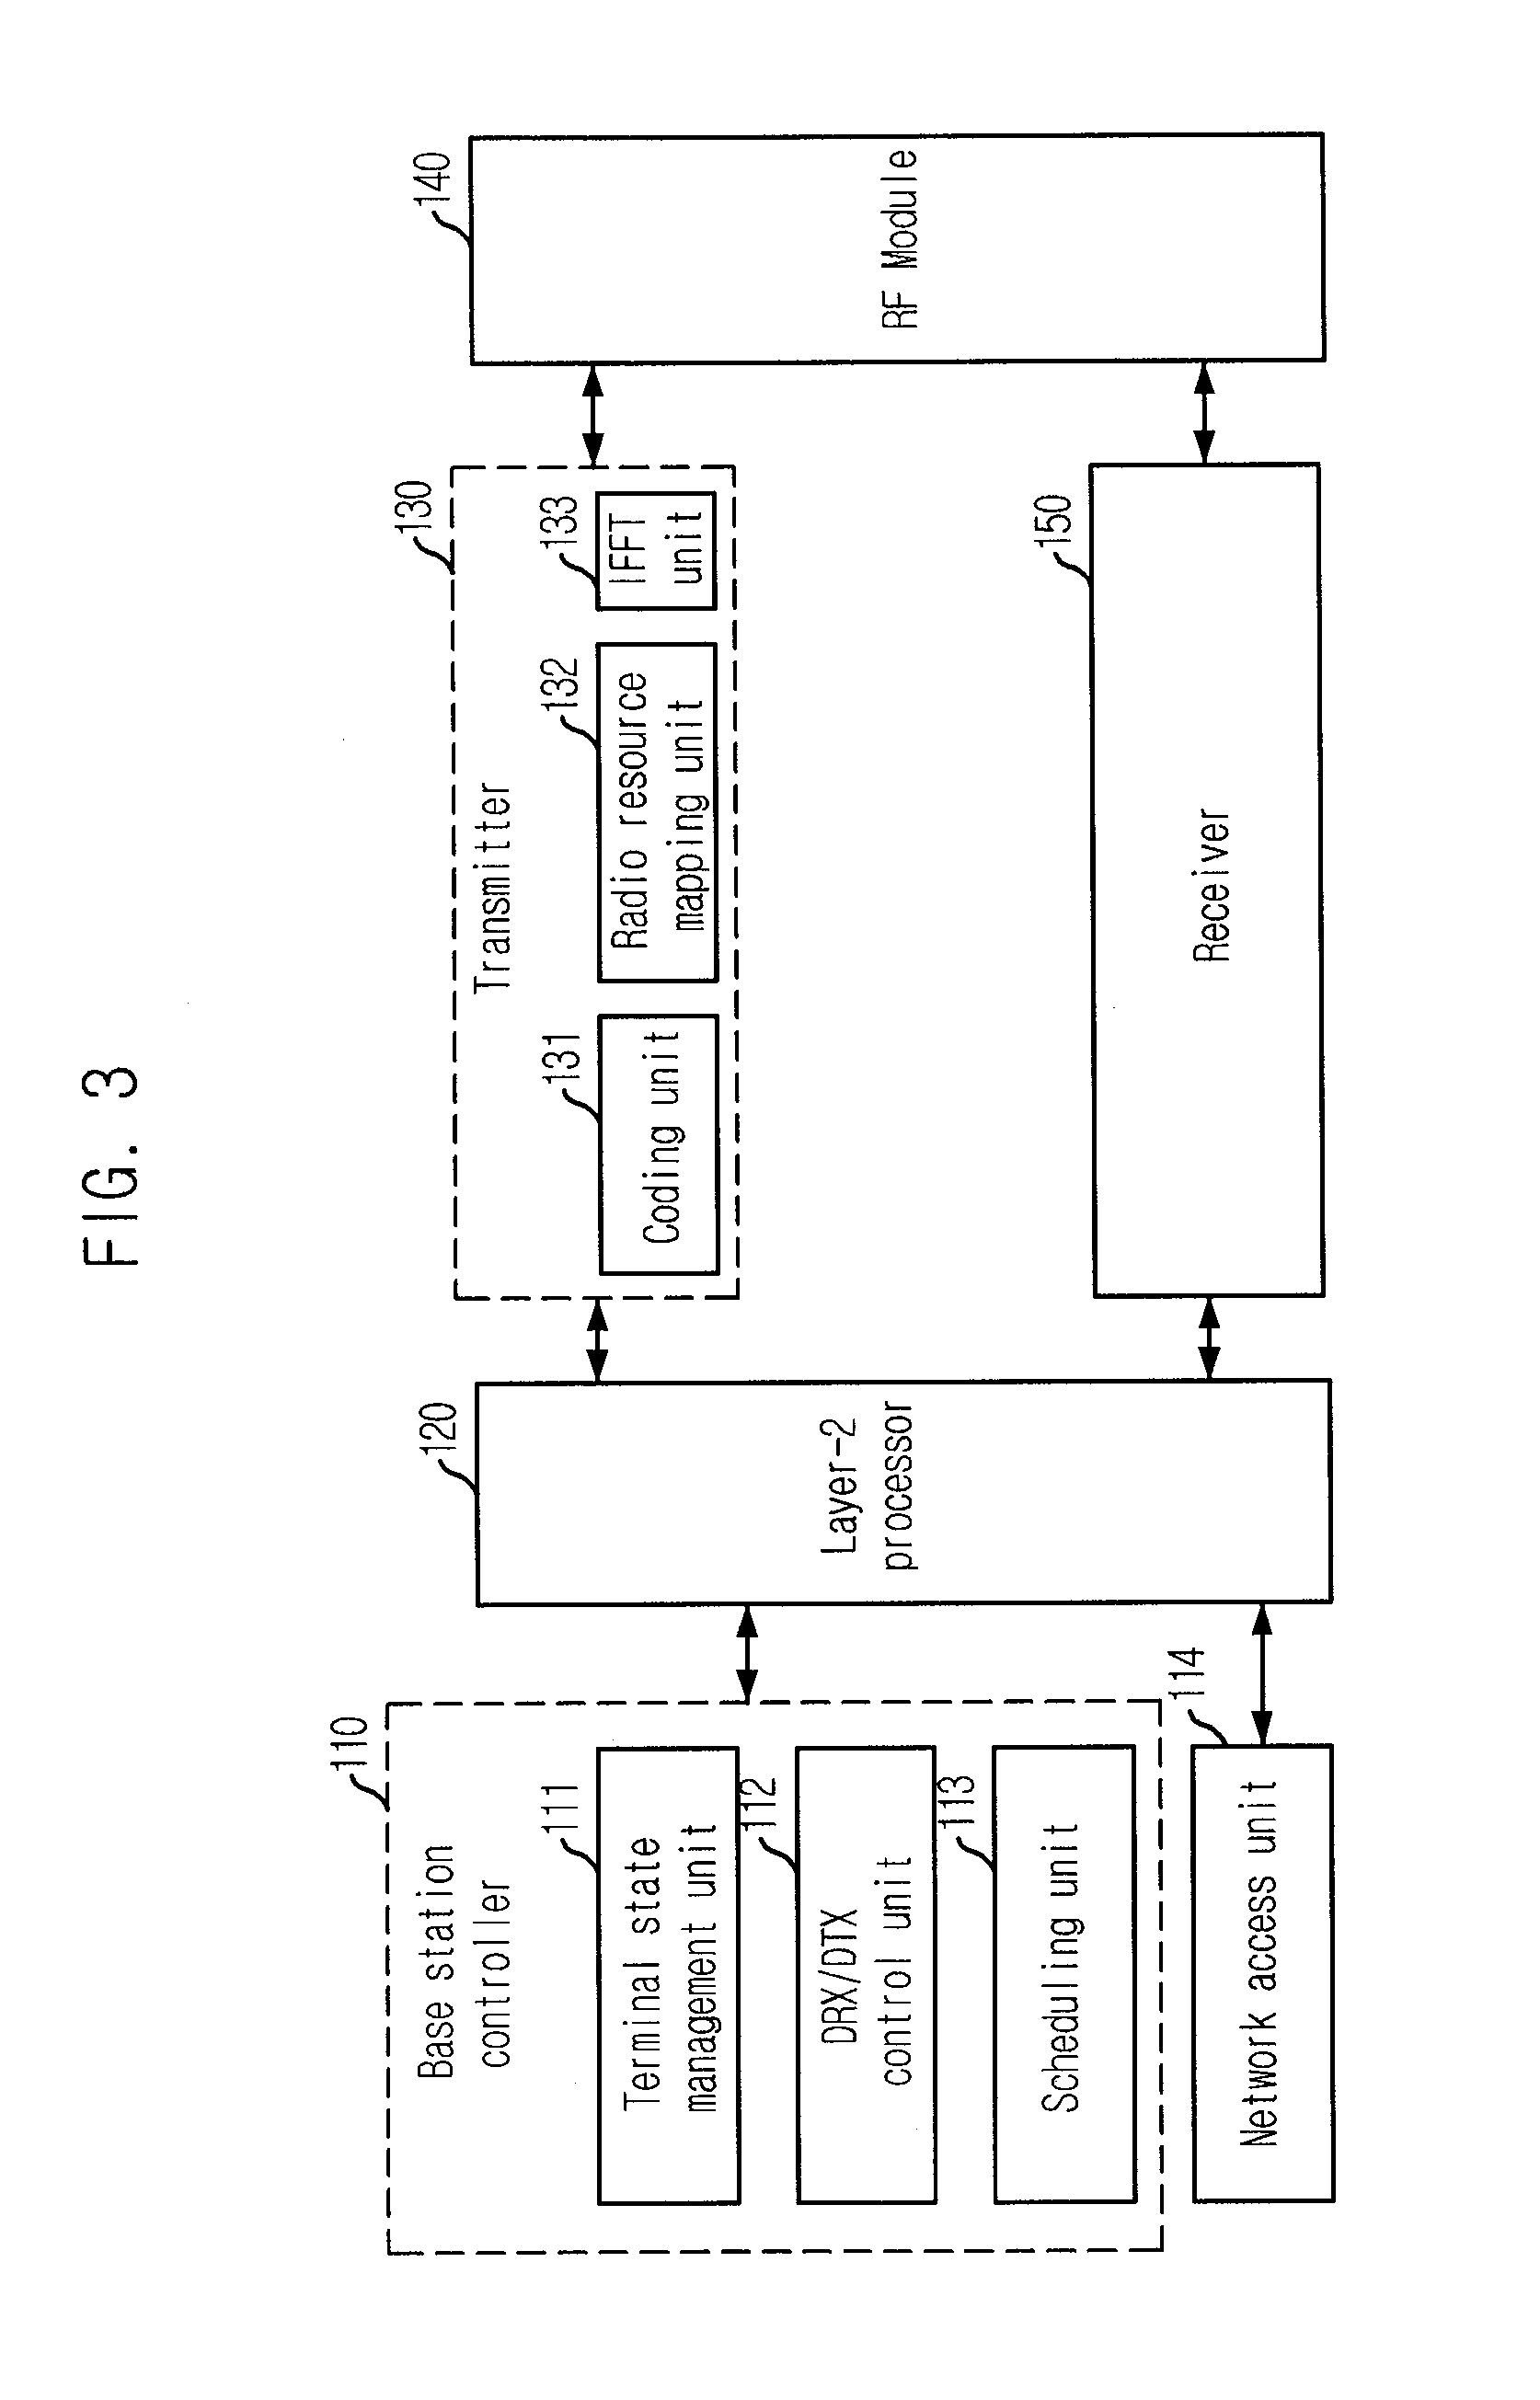 Method and Apparatus for Discontinuous Transmission/Reception Operation for Reducing Power Consumption in Celluar System